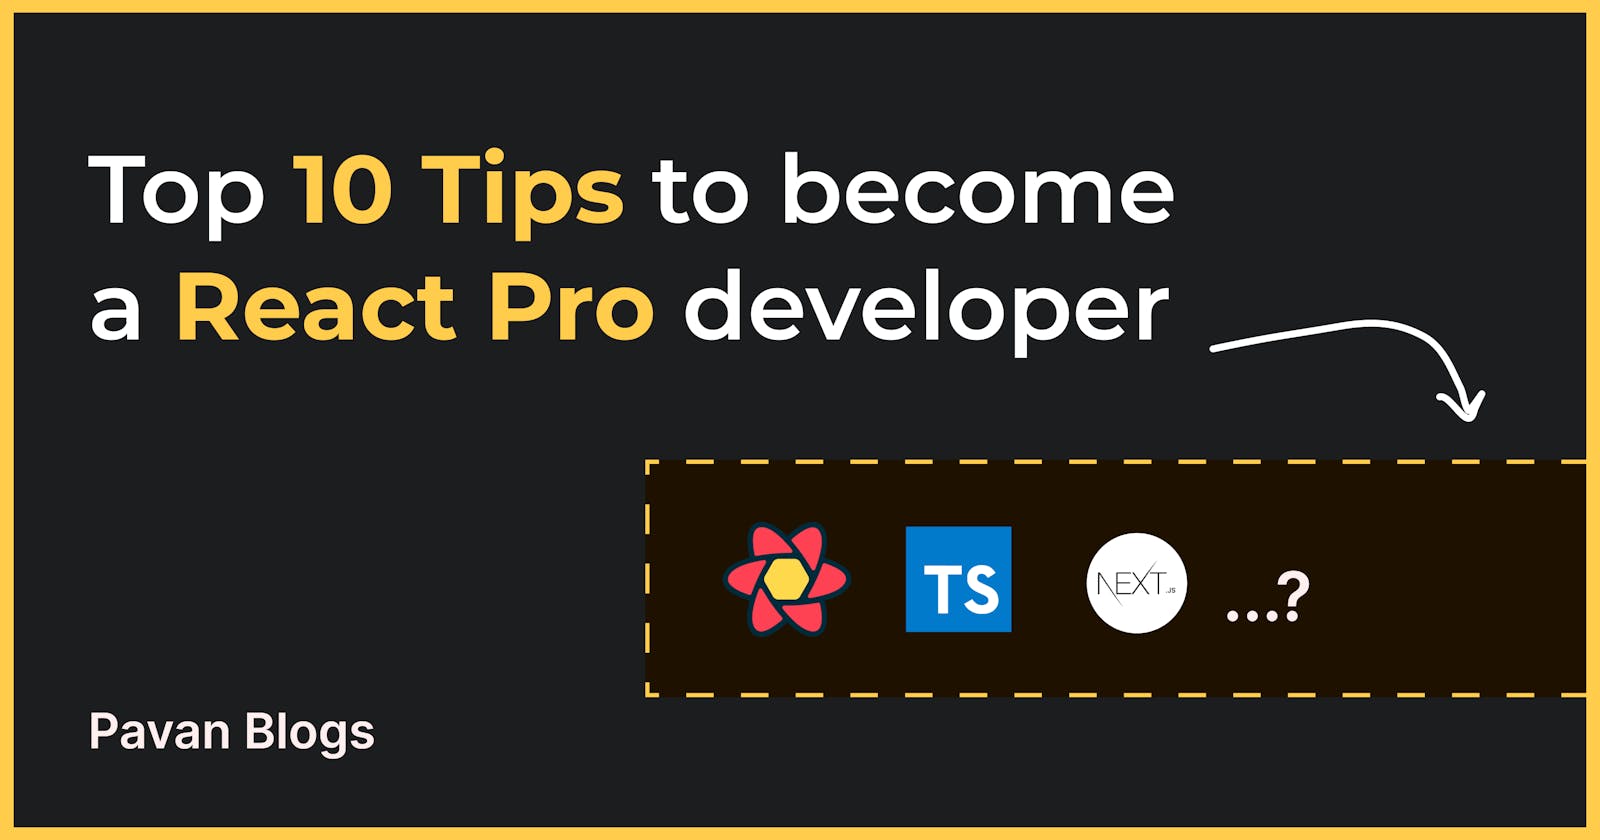 Become a React Pro: Top 10 Tips for Improving Your Skills